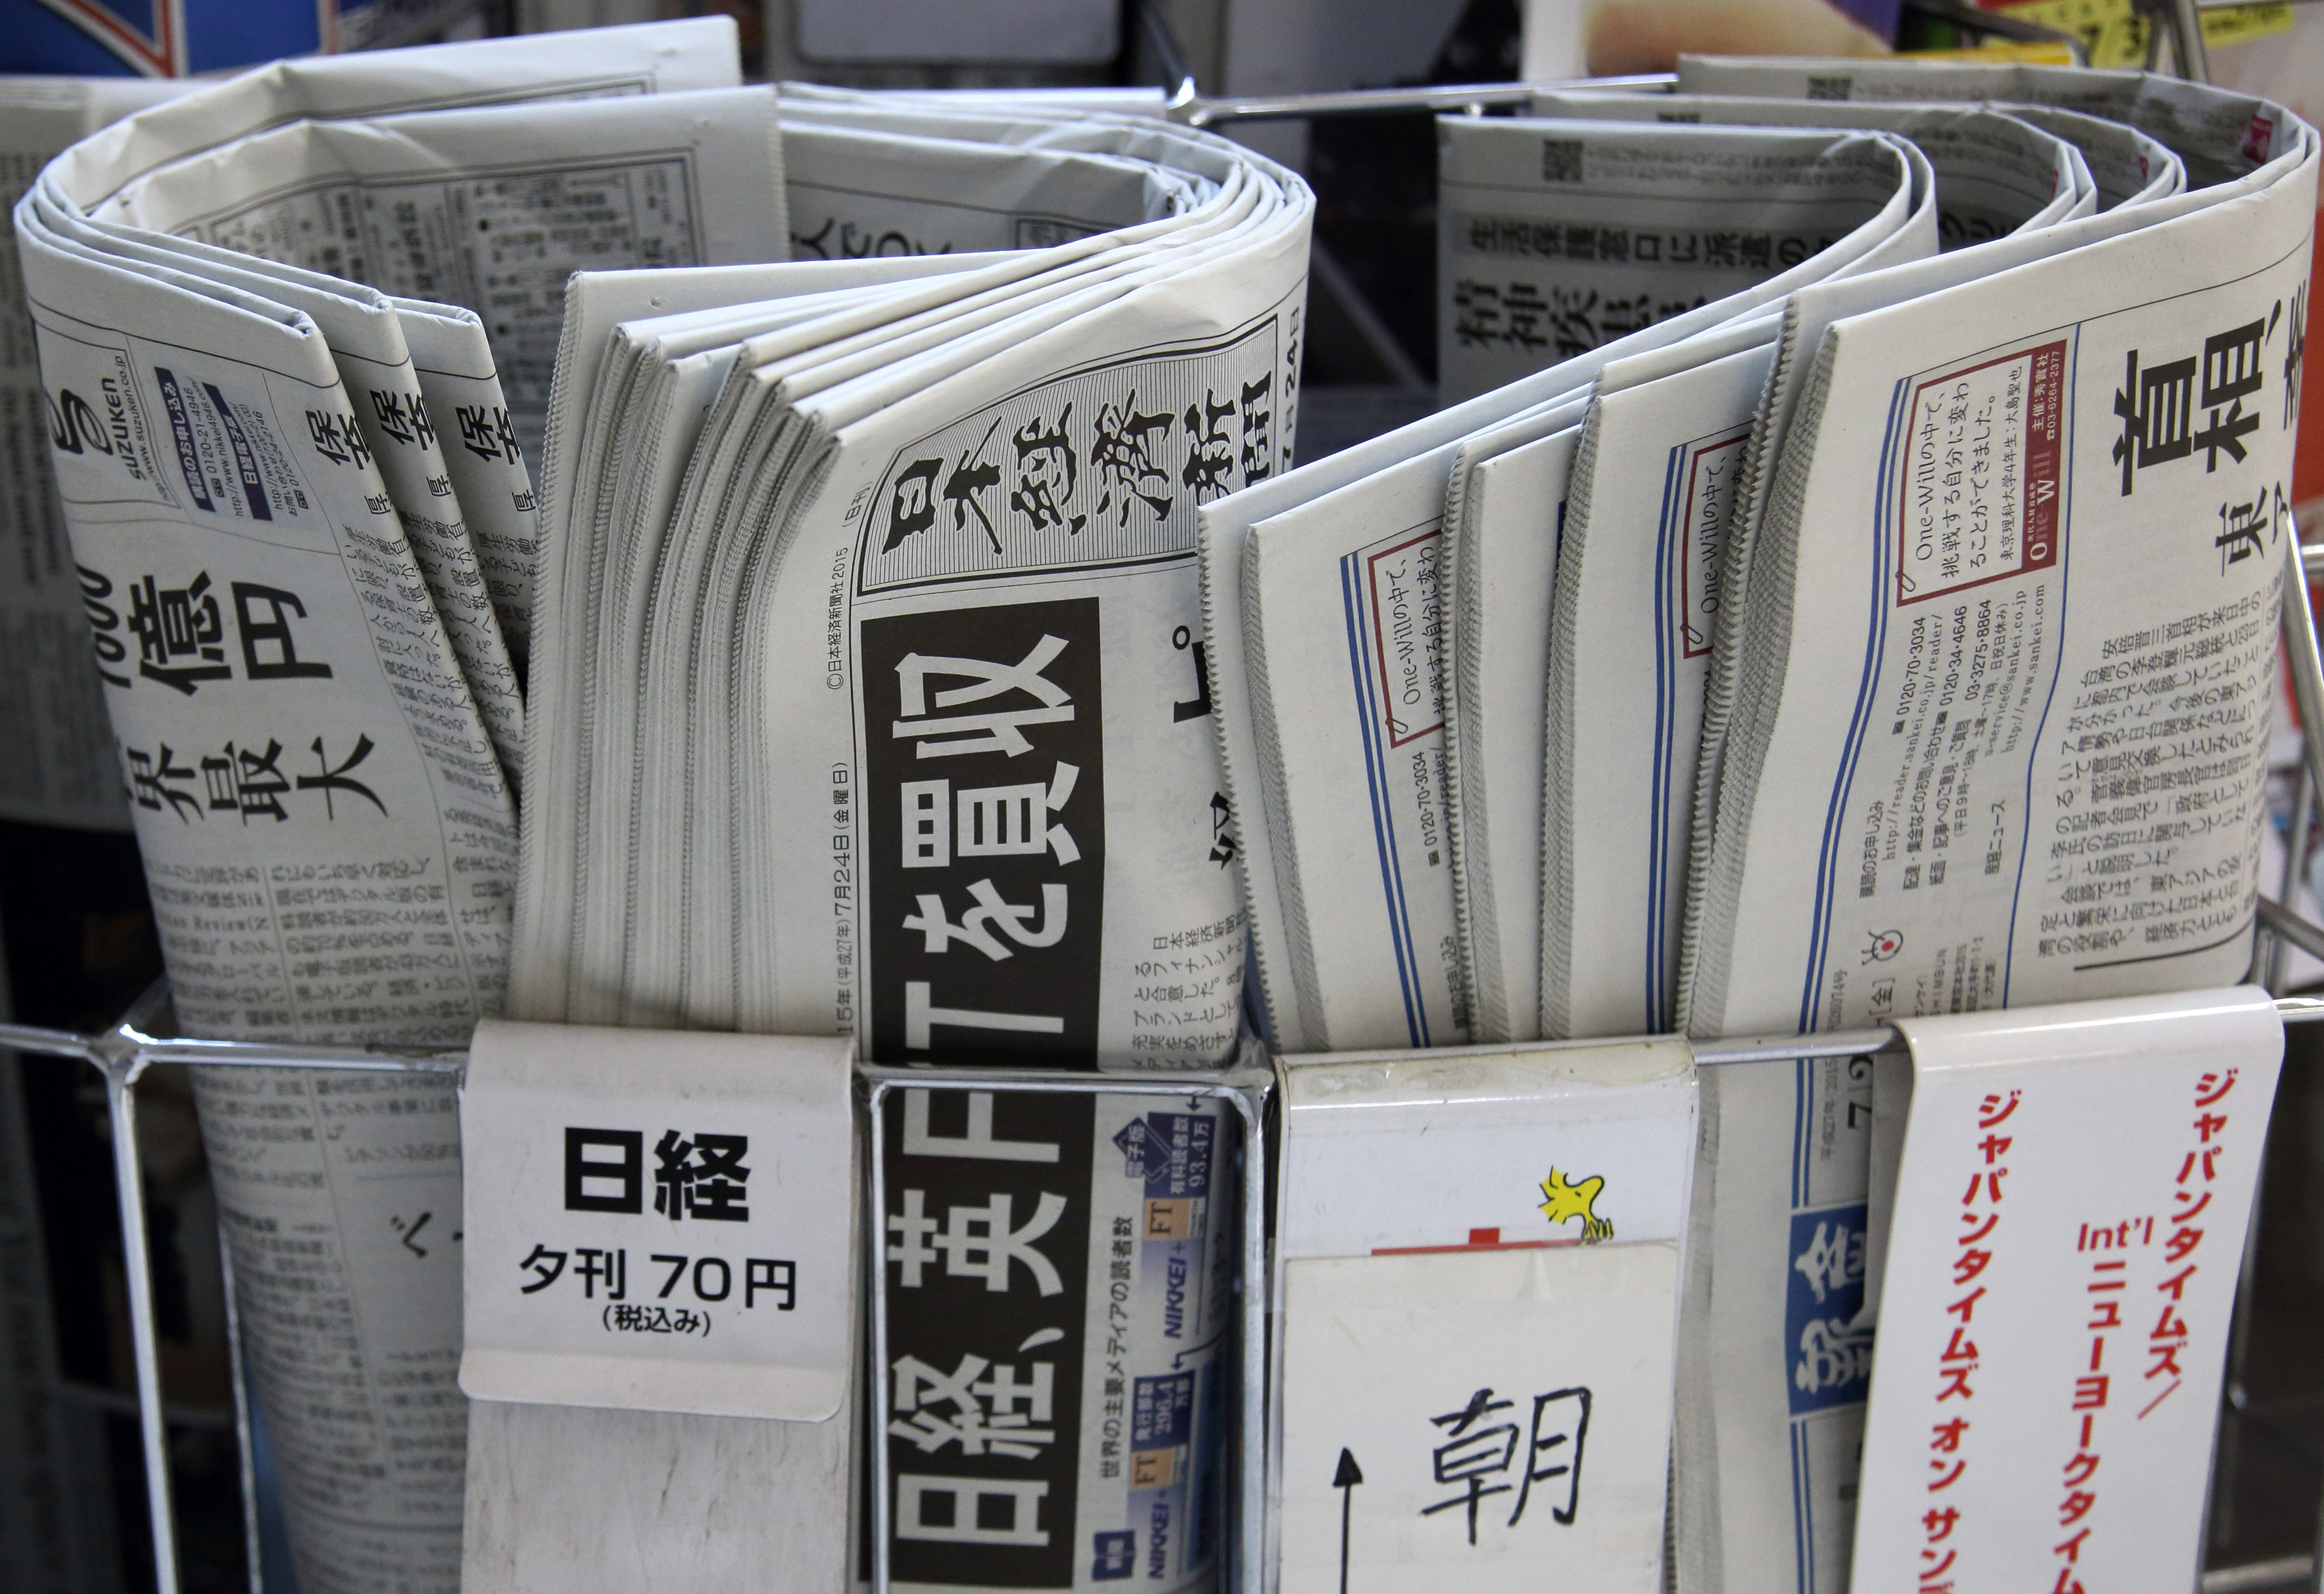 Newspapers, including the Nikkei (center), are displayed for sale in Tokyo on Friday. The headline set in black says 'Nikkei buys British FT.' | BLOOMBERG